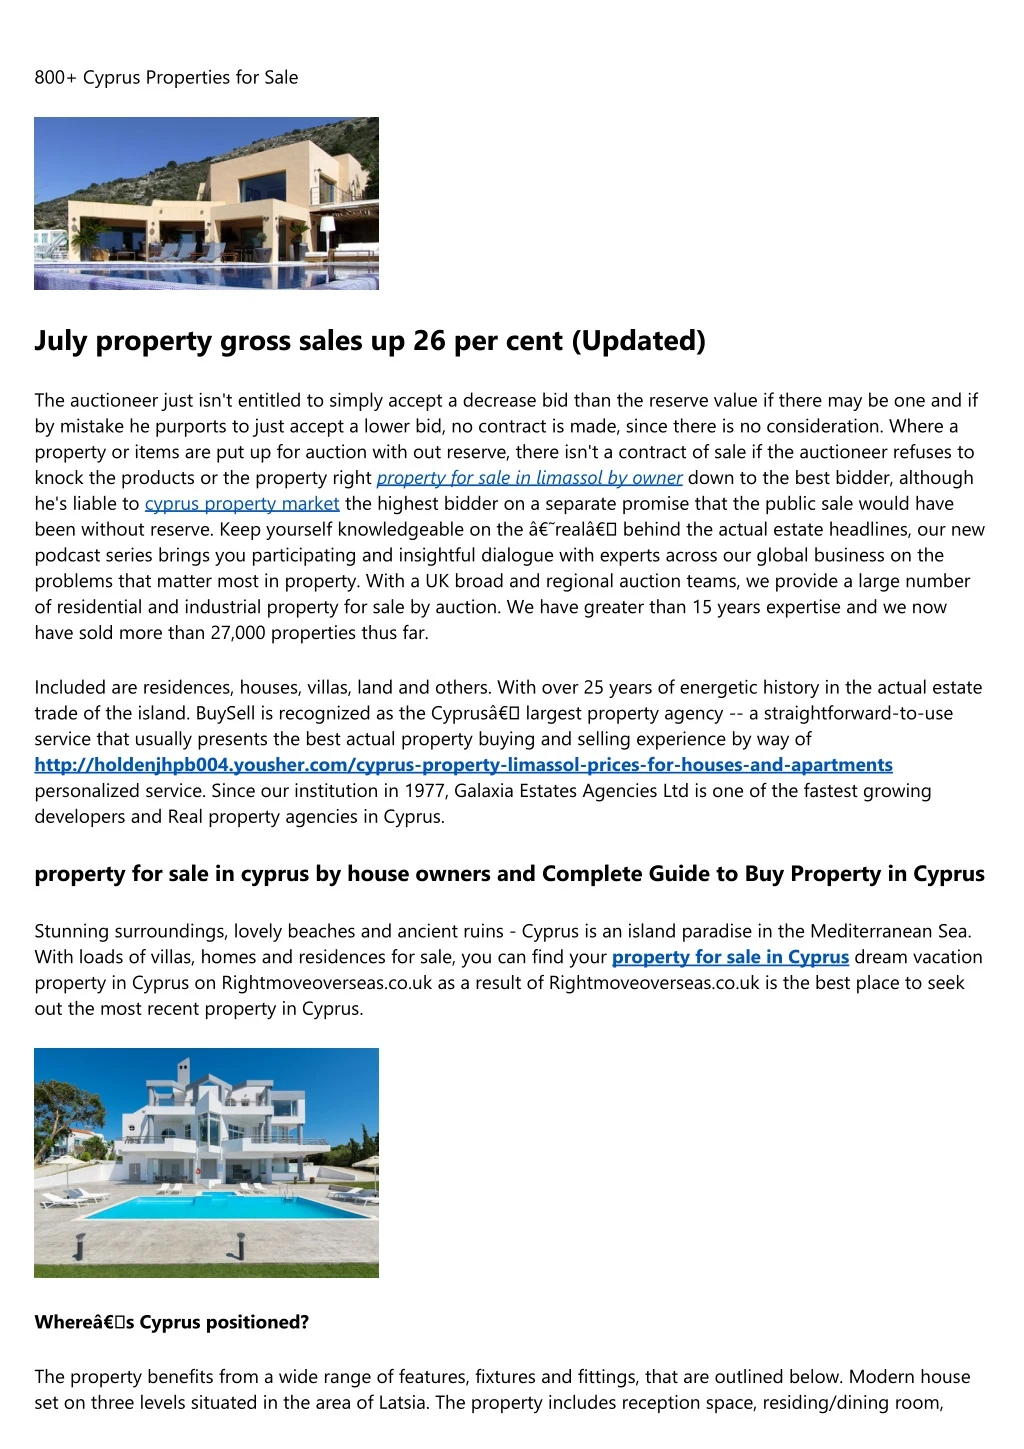 800 cyprus properties for sale